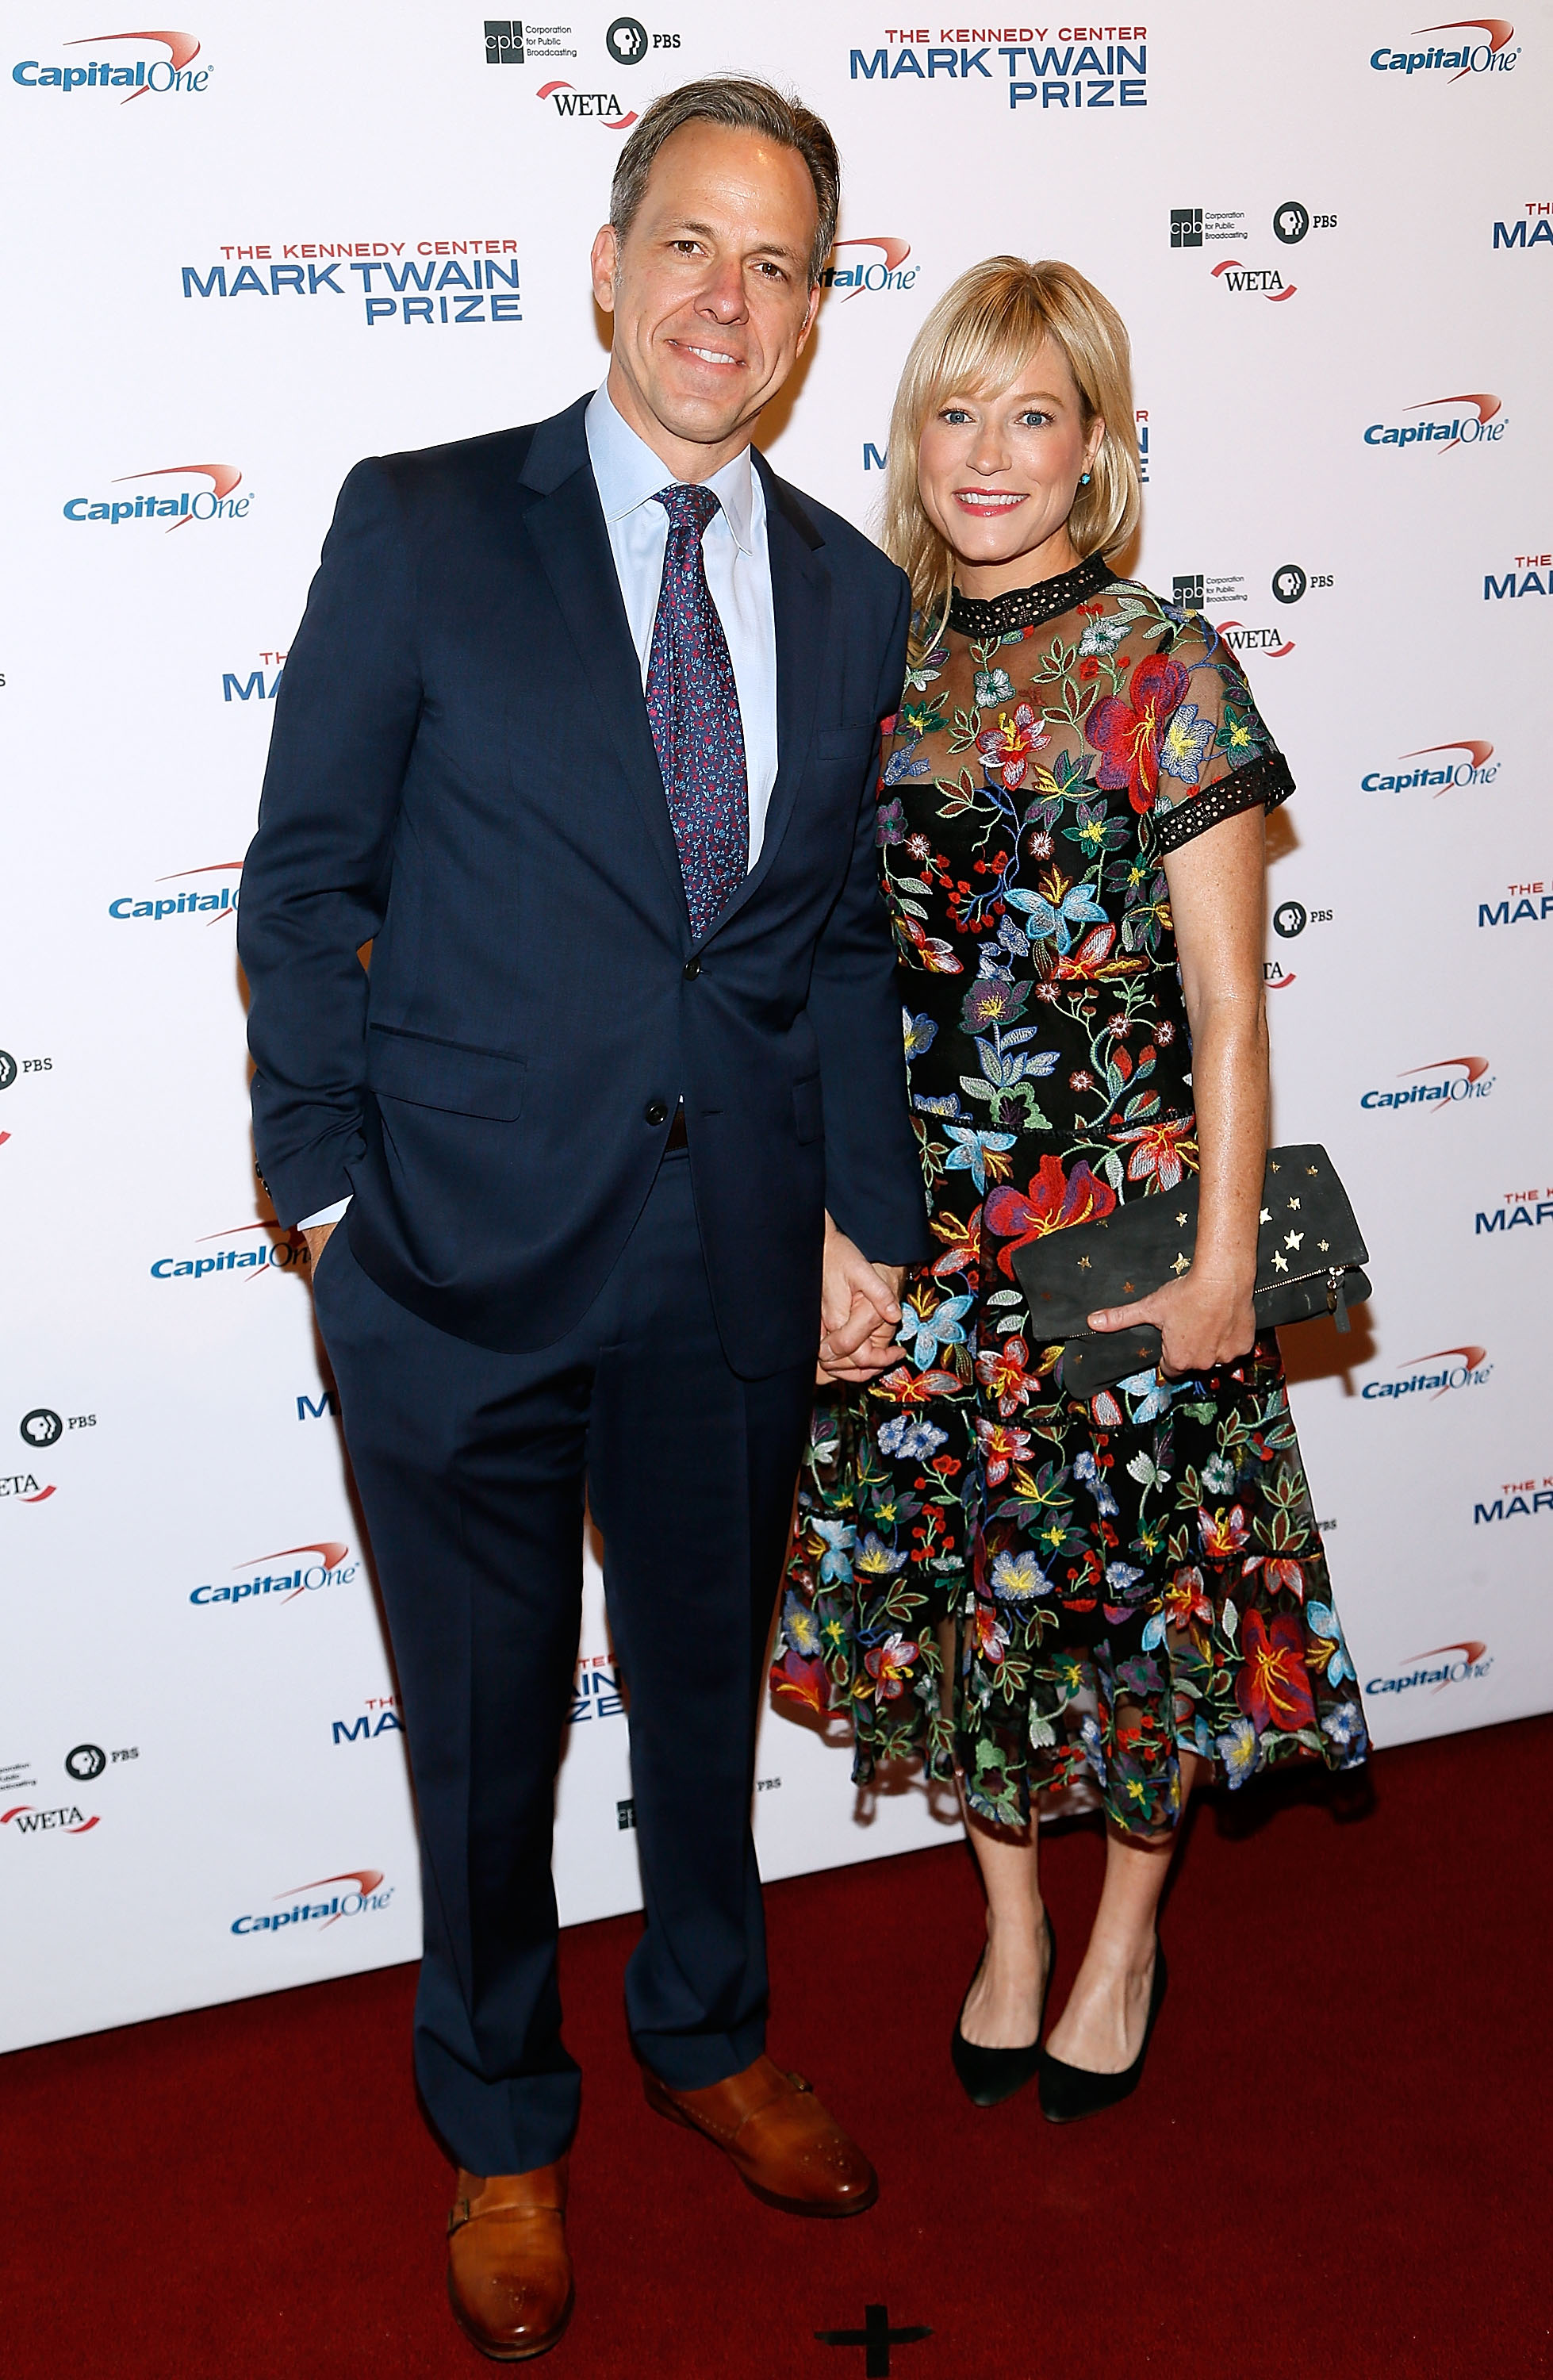 Jake Tapper and Jennifer Marie Brown at the 2017 Mark Twain Prize for American Humor on October 22, 2017, in Washington, D.C. | Source: Getty Images